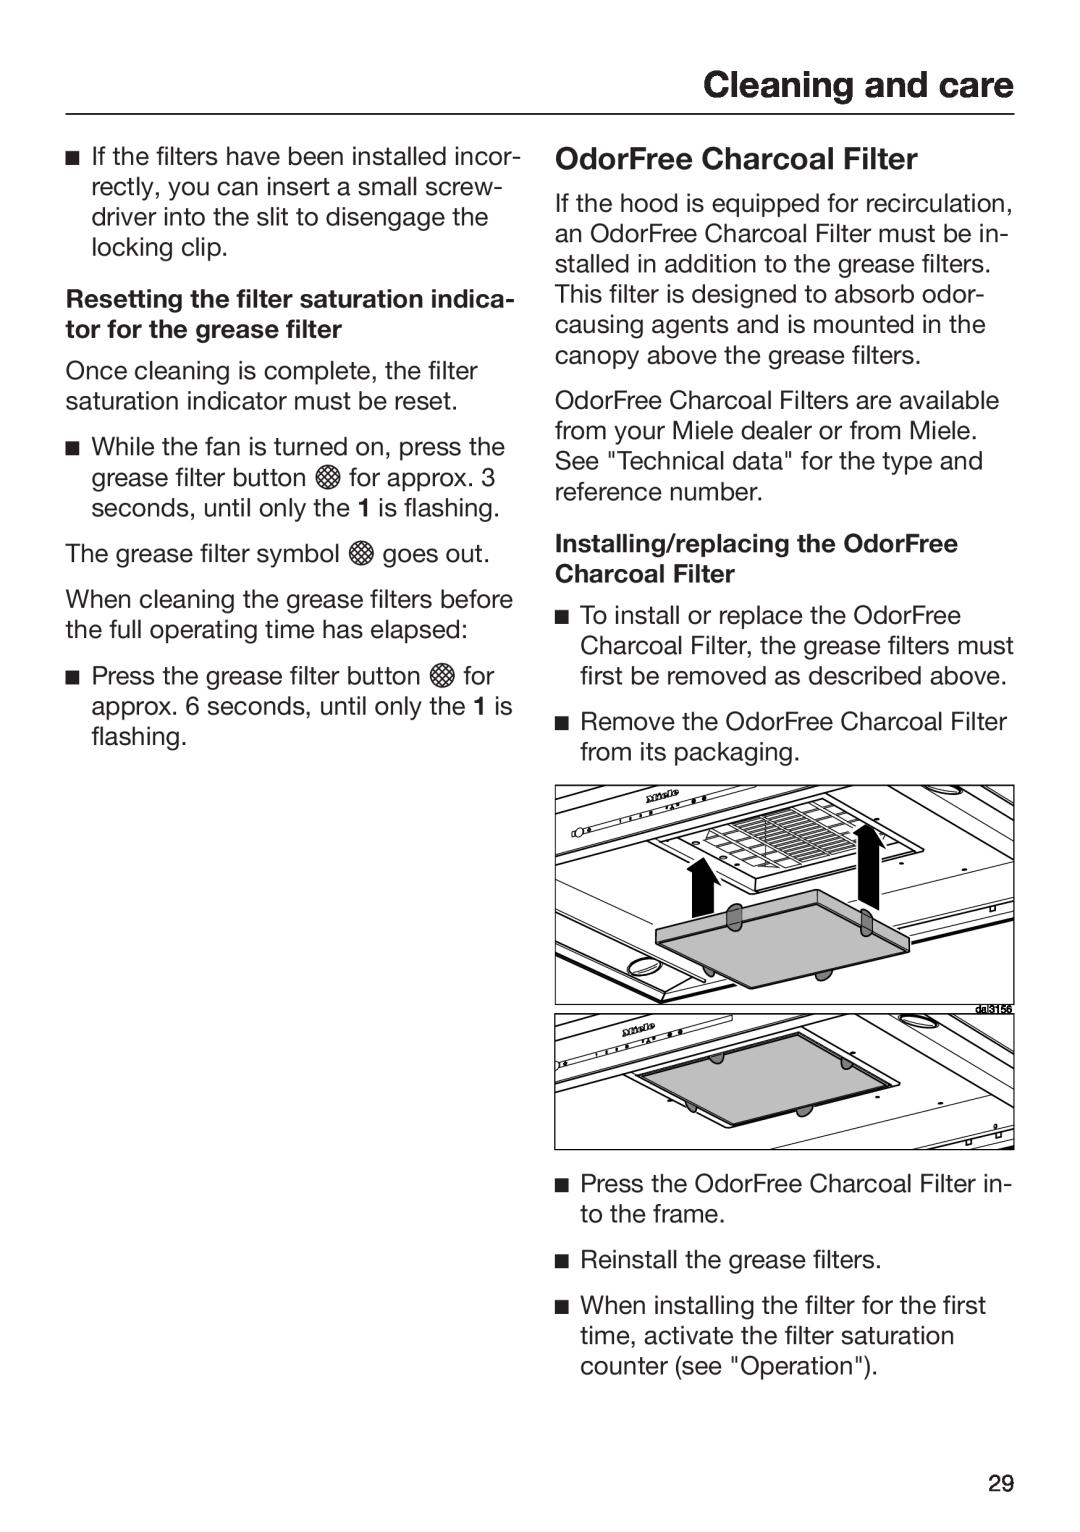 Miele M.-Nr. 09 805 980 installation instructions Cleaning and care, Installing/replacing the OdorFree Charcoal Filter 